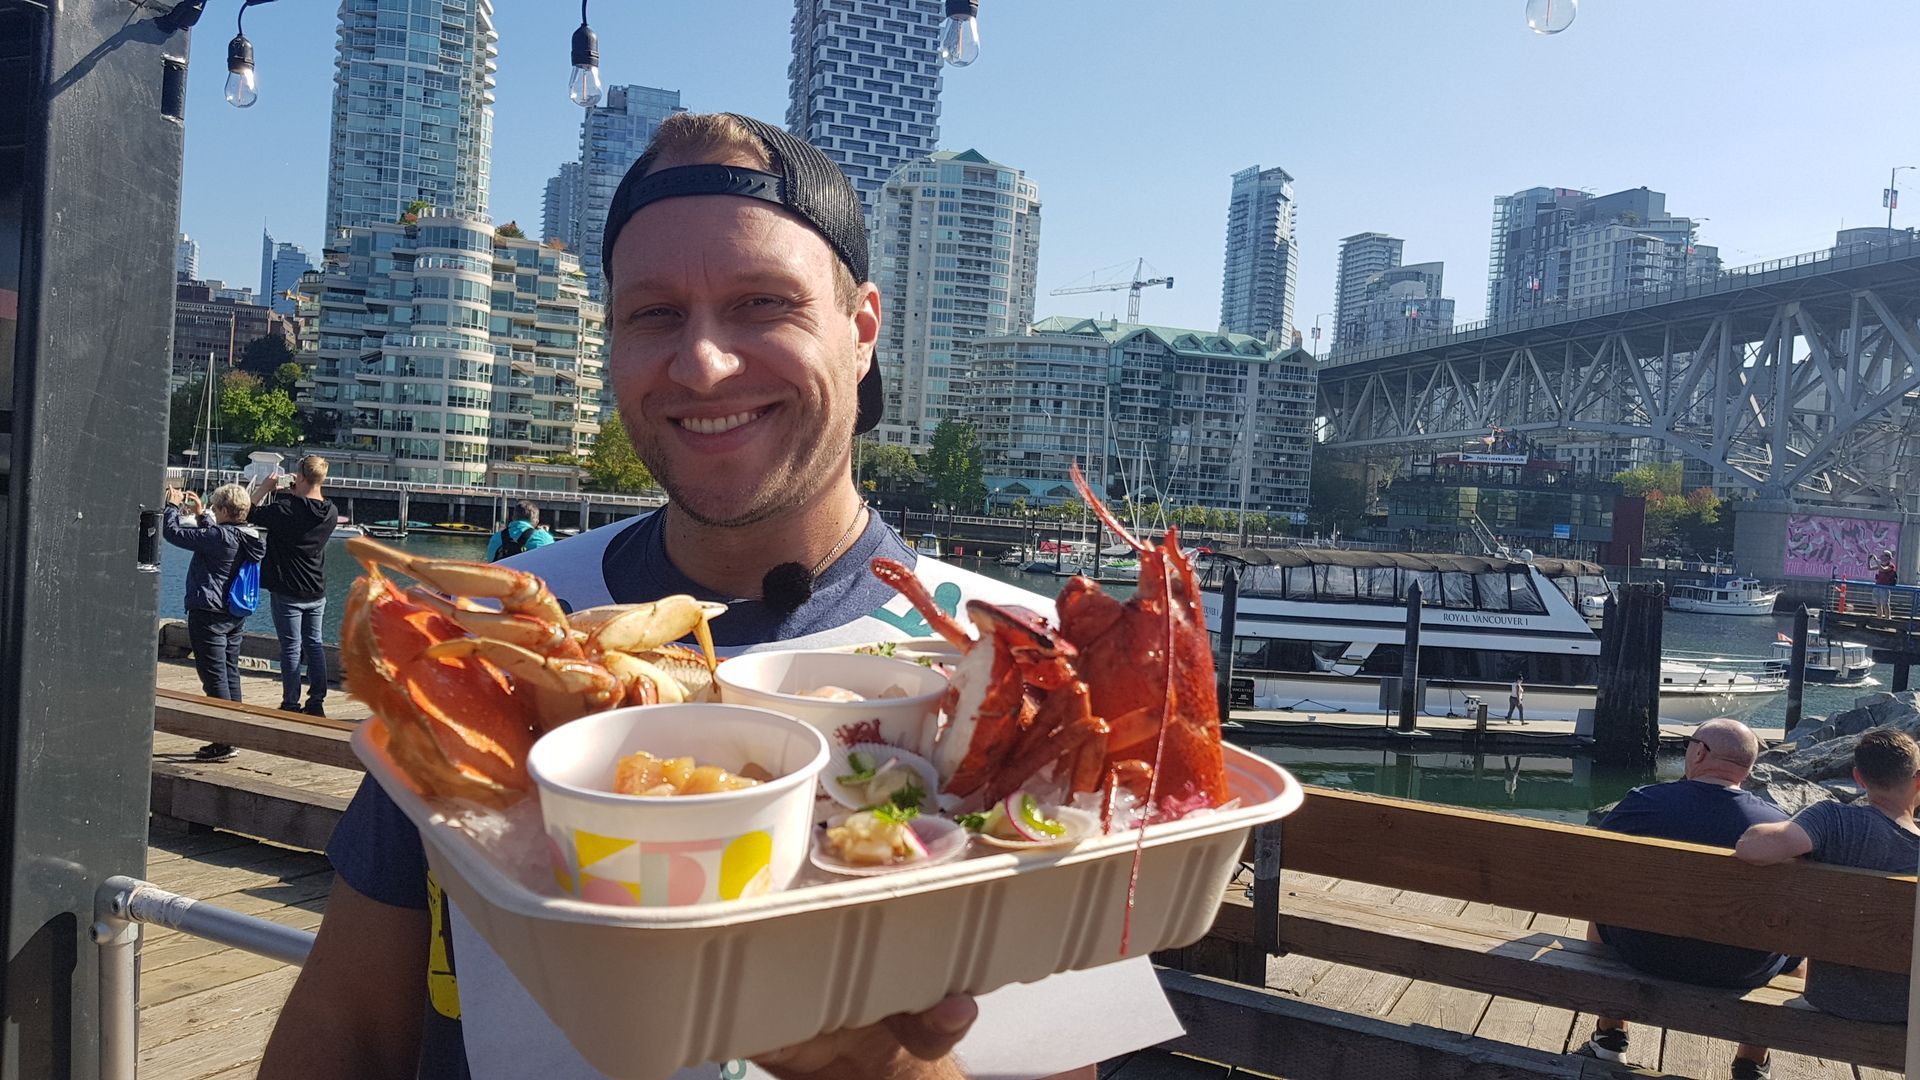 Furious Pete in Vancouver